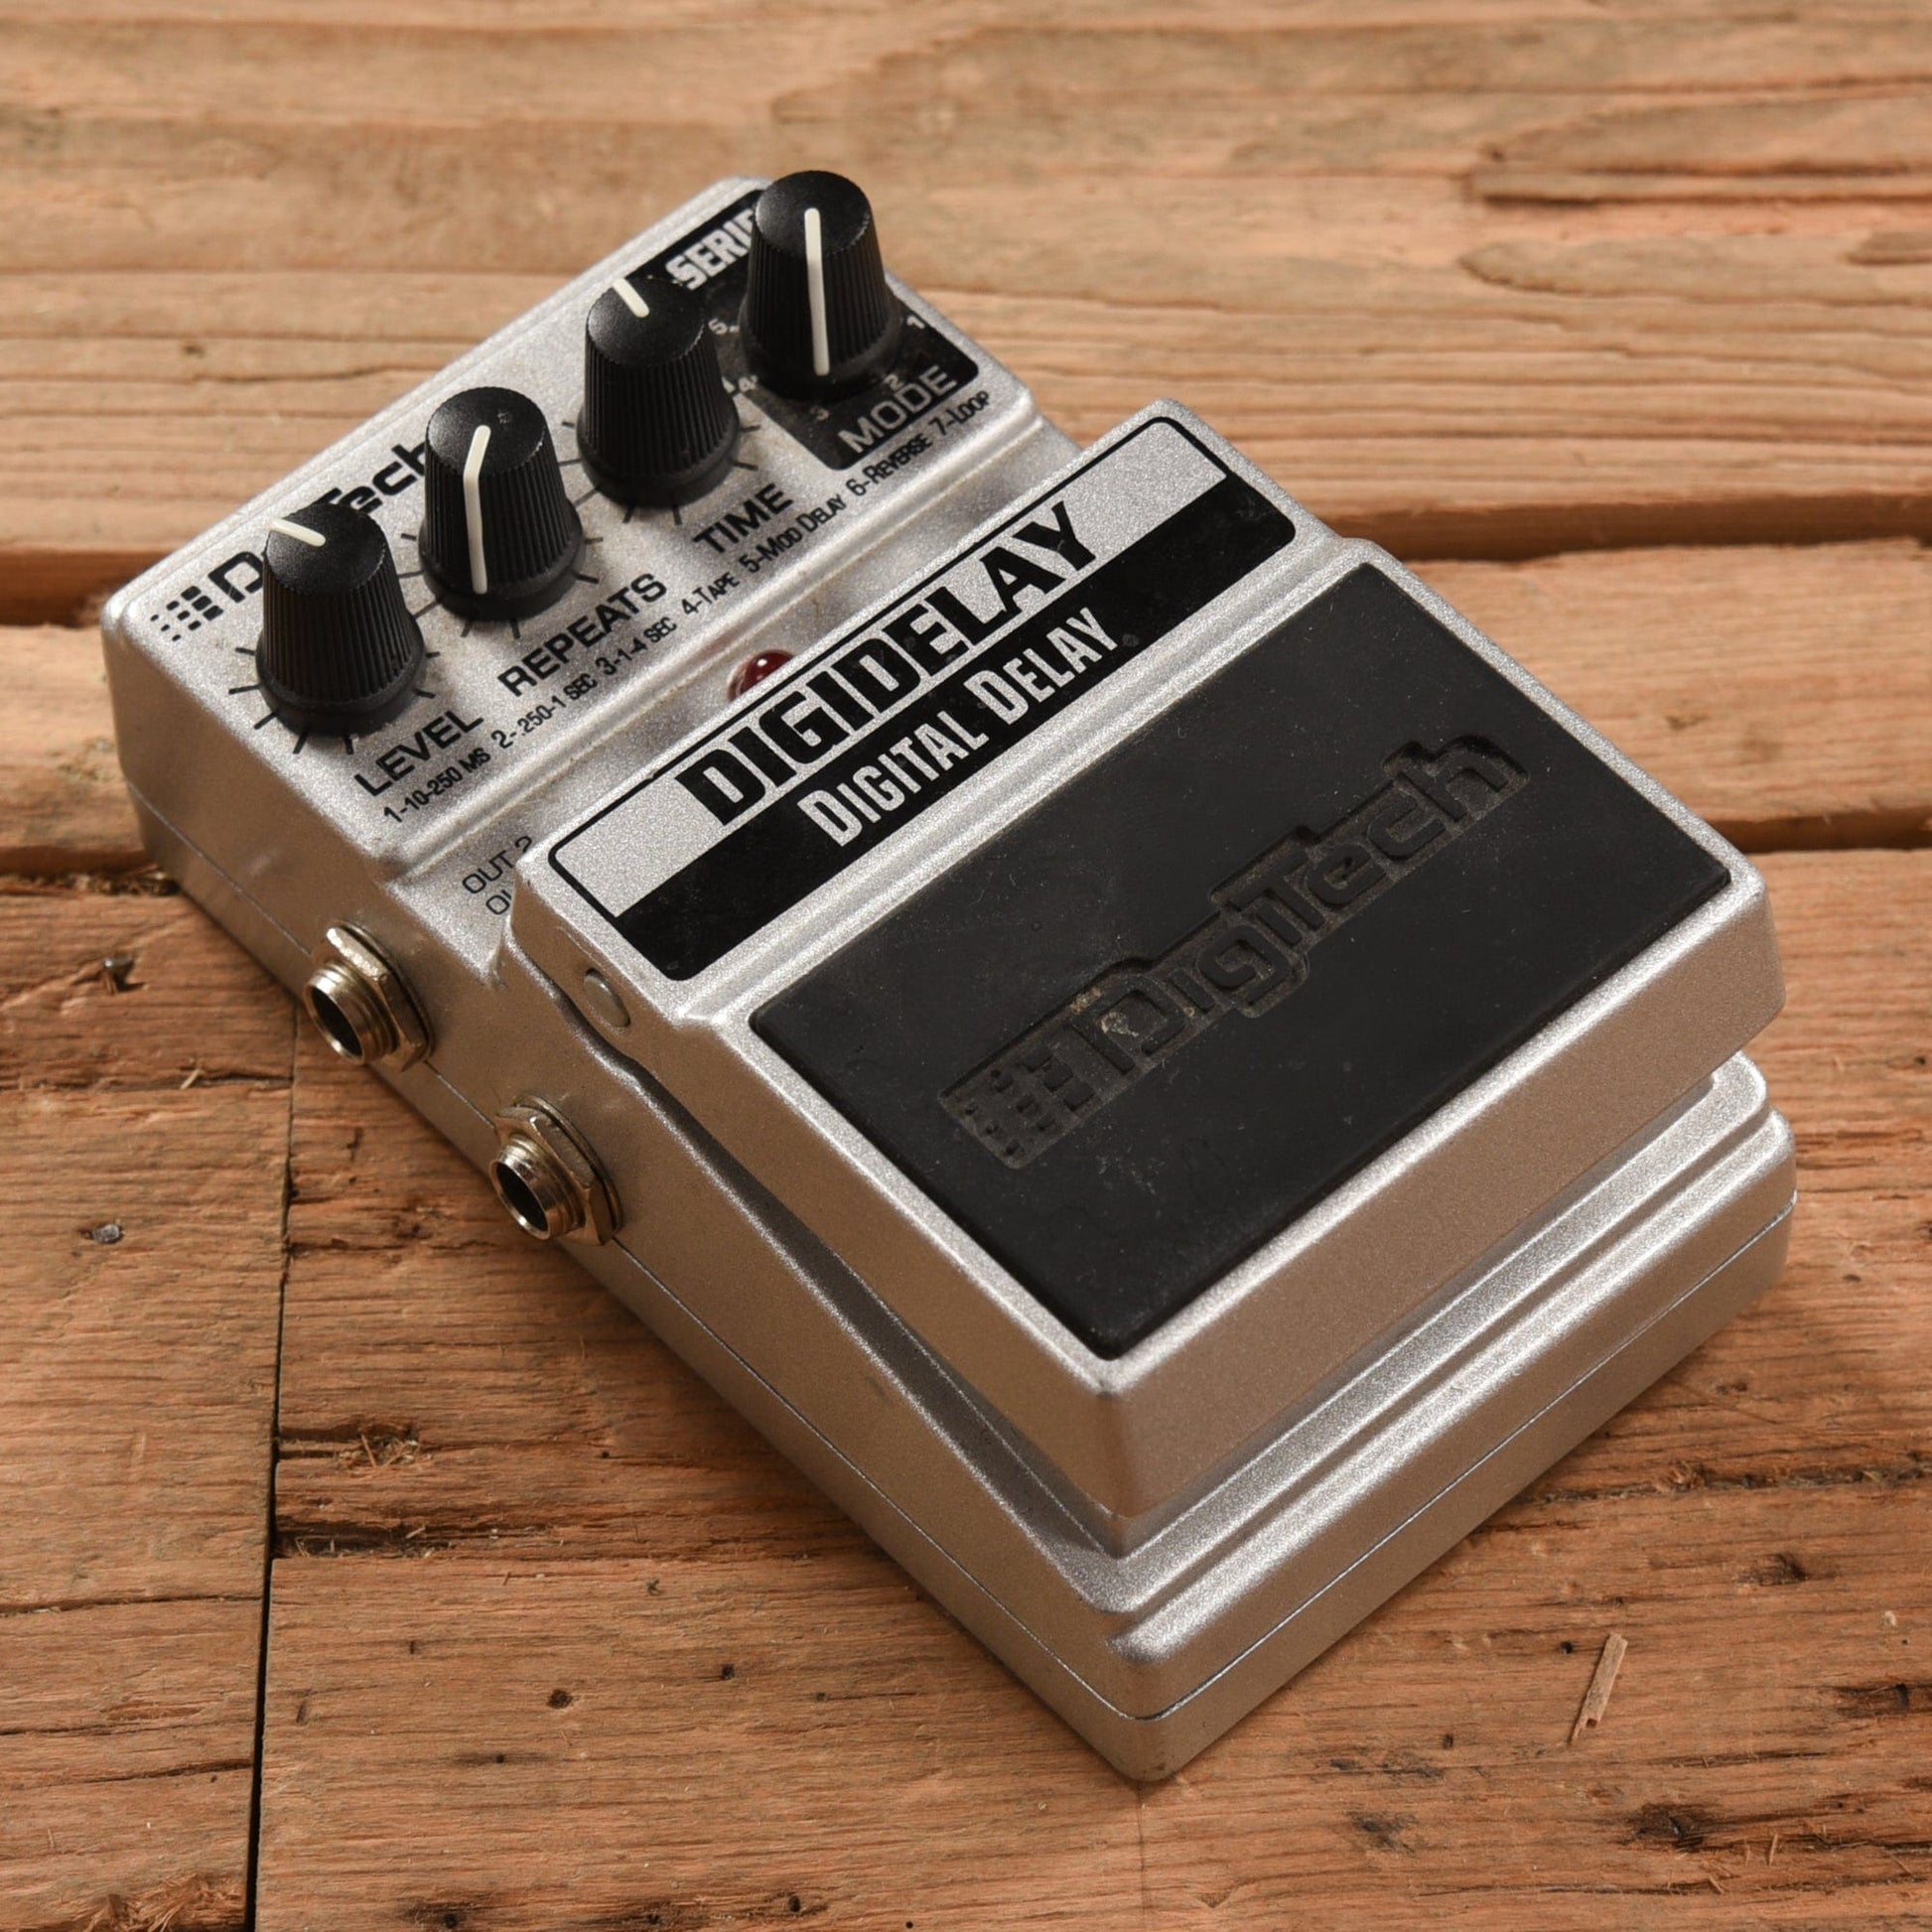 Digitech Digidelay Digital Delay Pedal Effects and Pedals / Delay